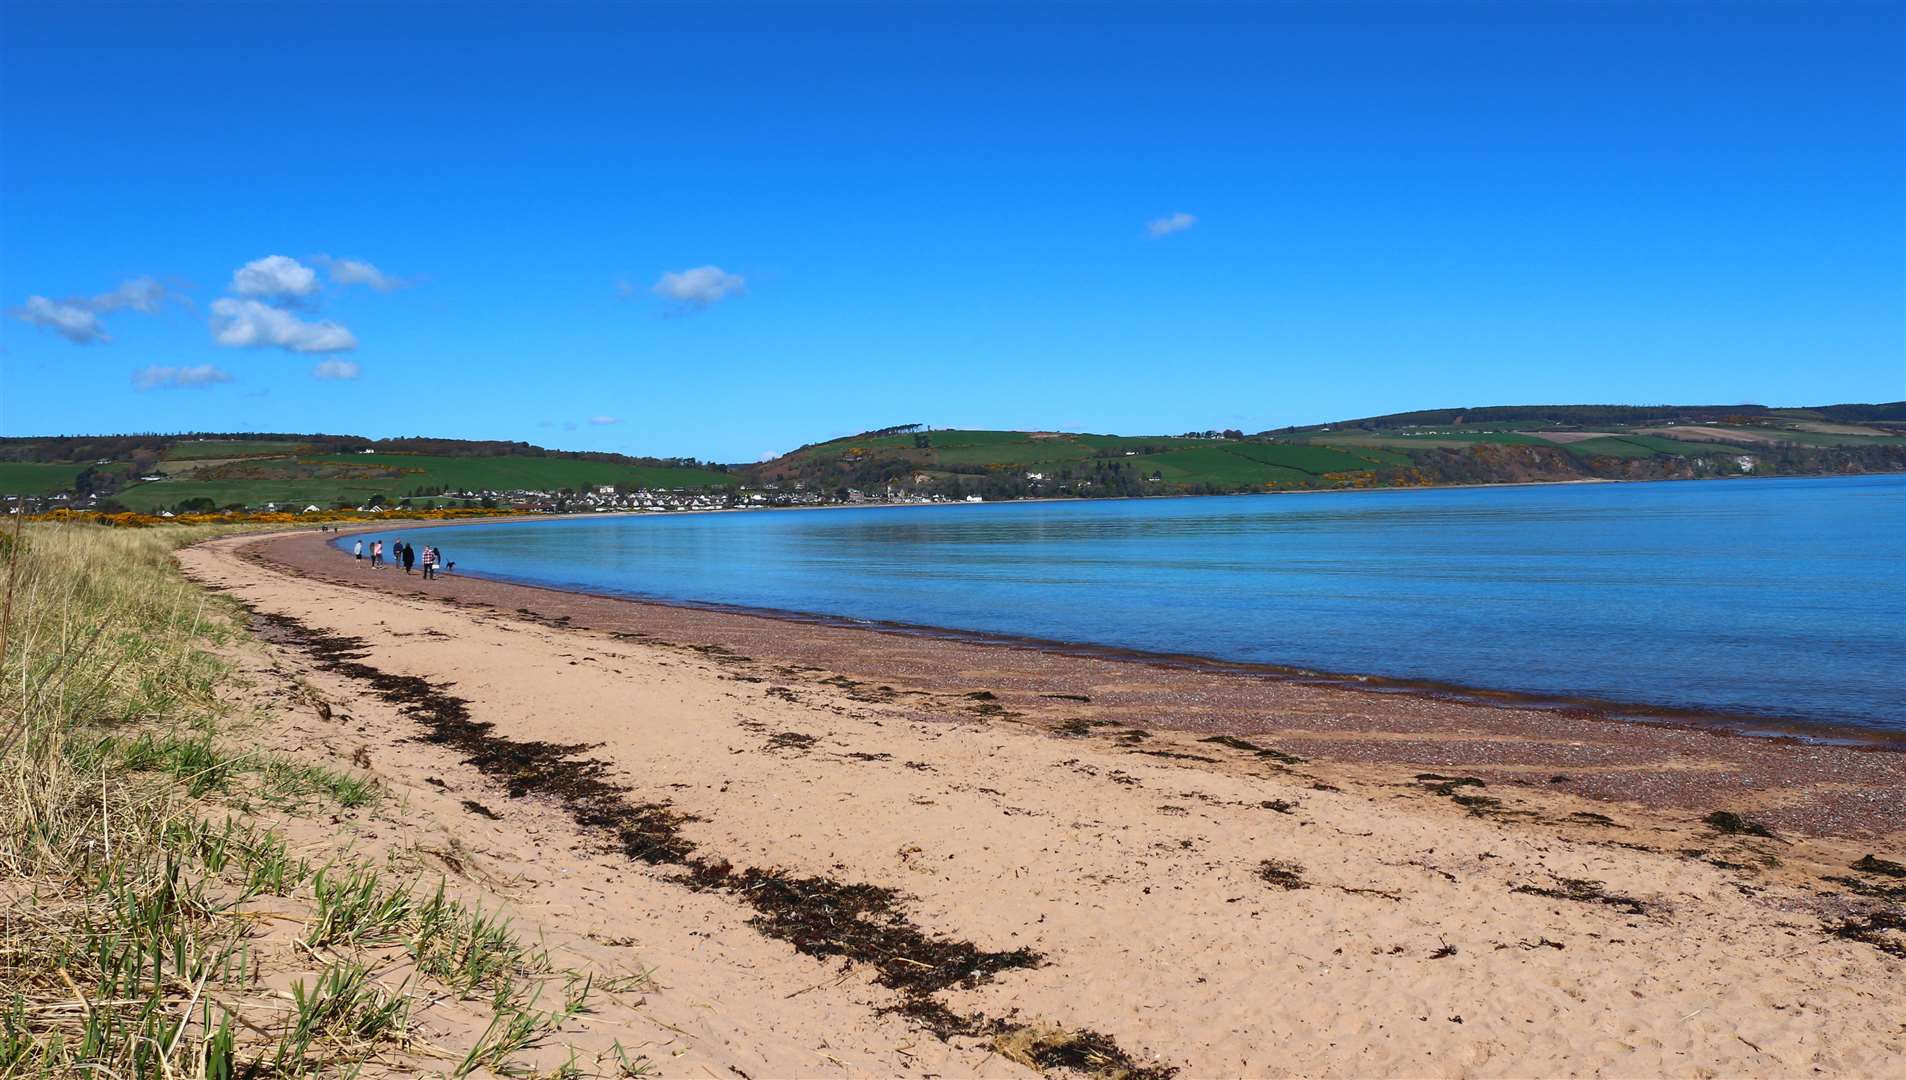 The beach between Rosemarkie and Chanonry Point.